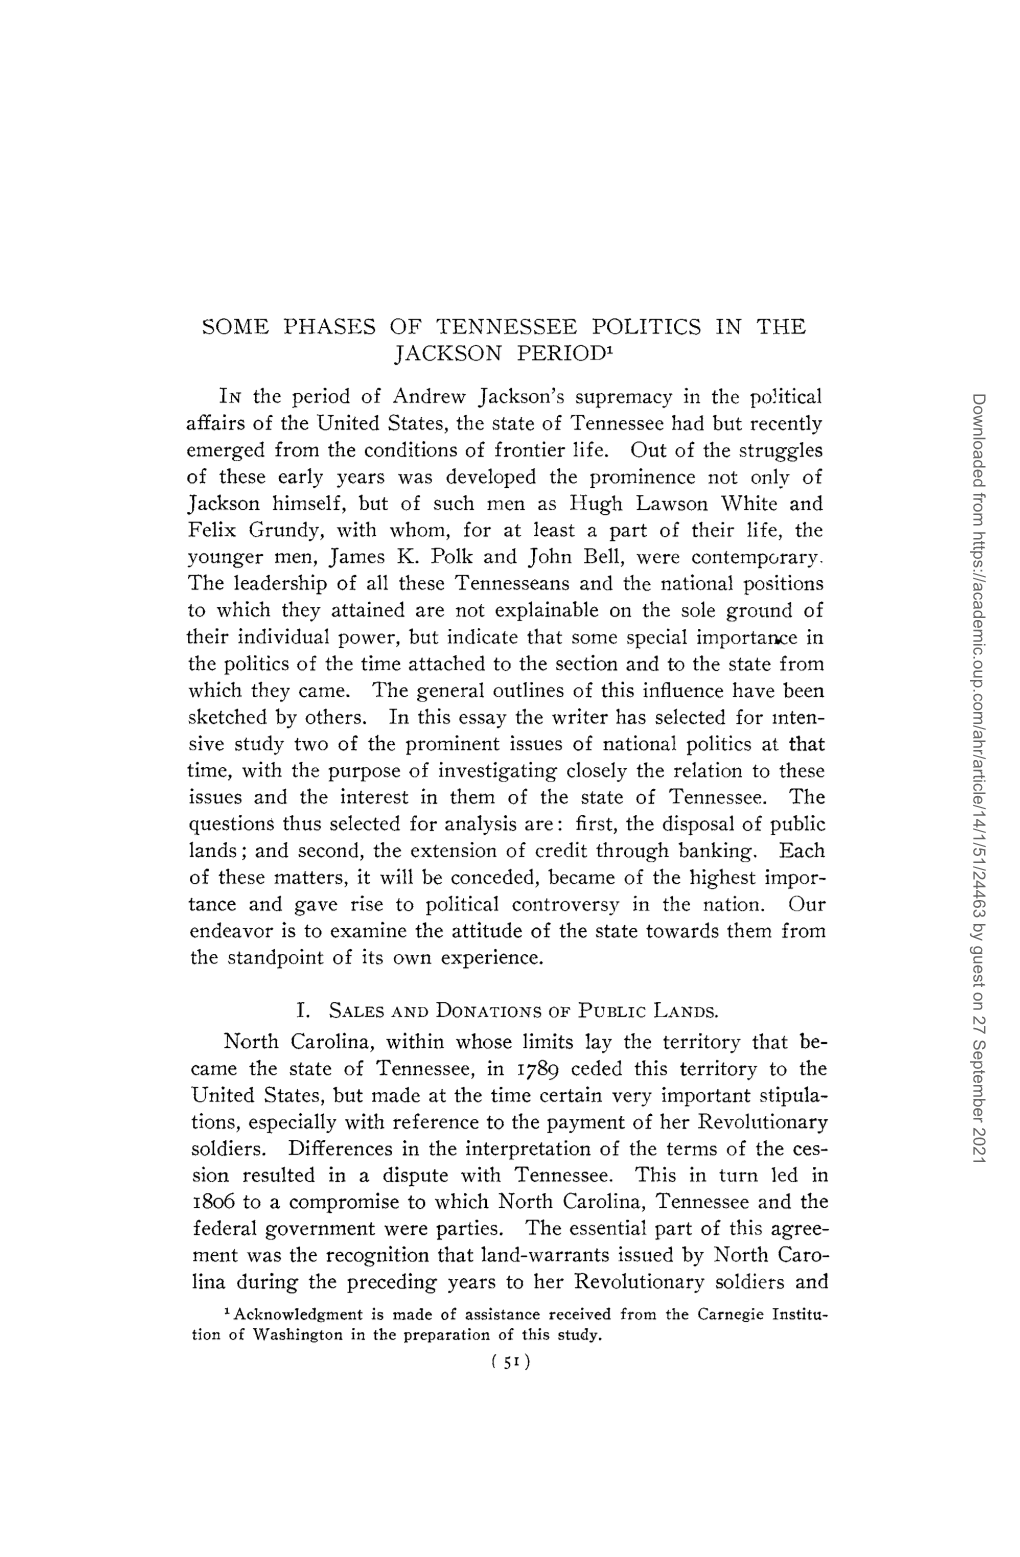 SOME PHASES of TENNESSEE POLITICS in the JACKSON Periodl